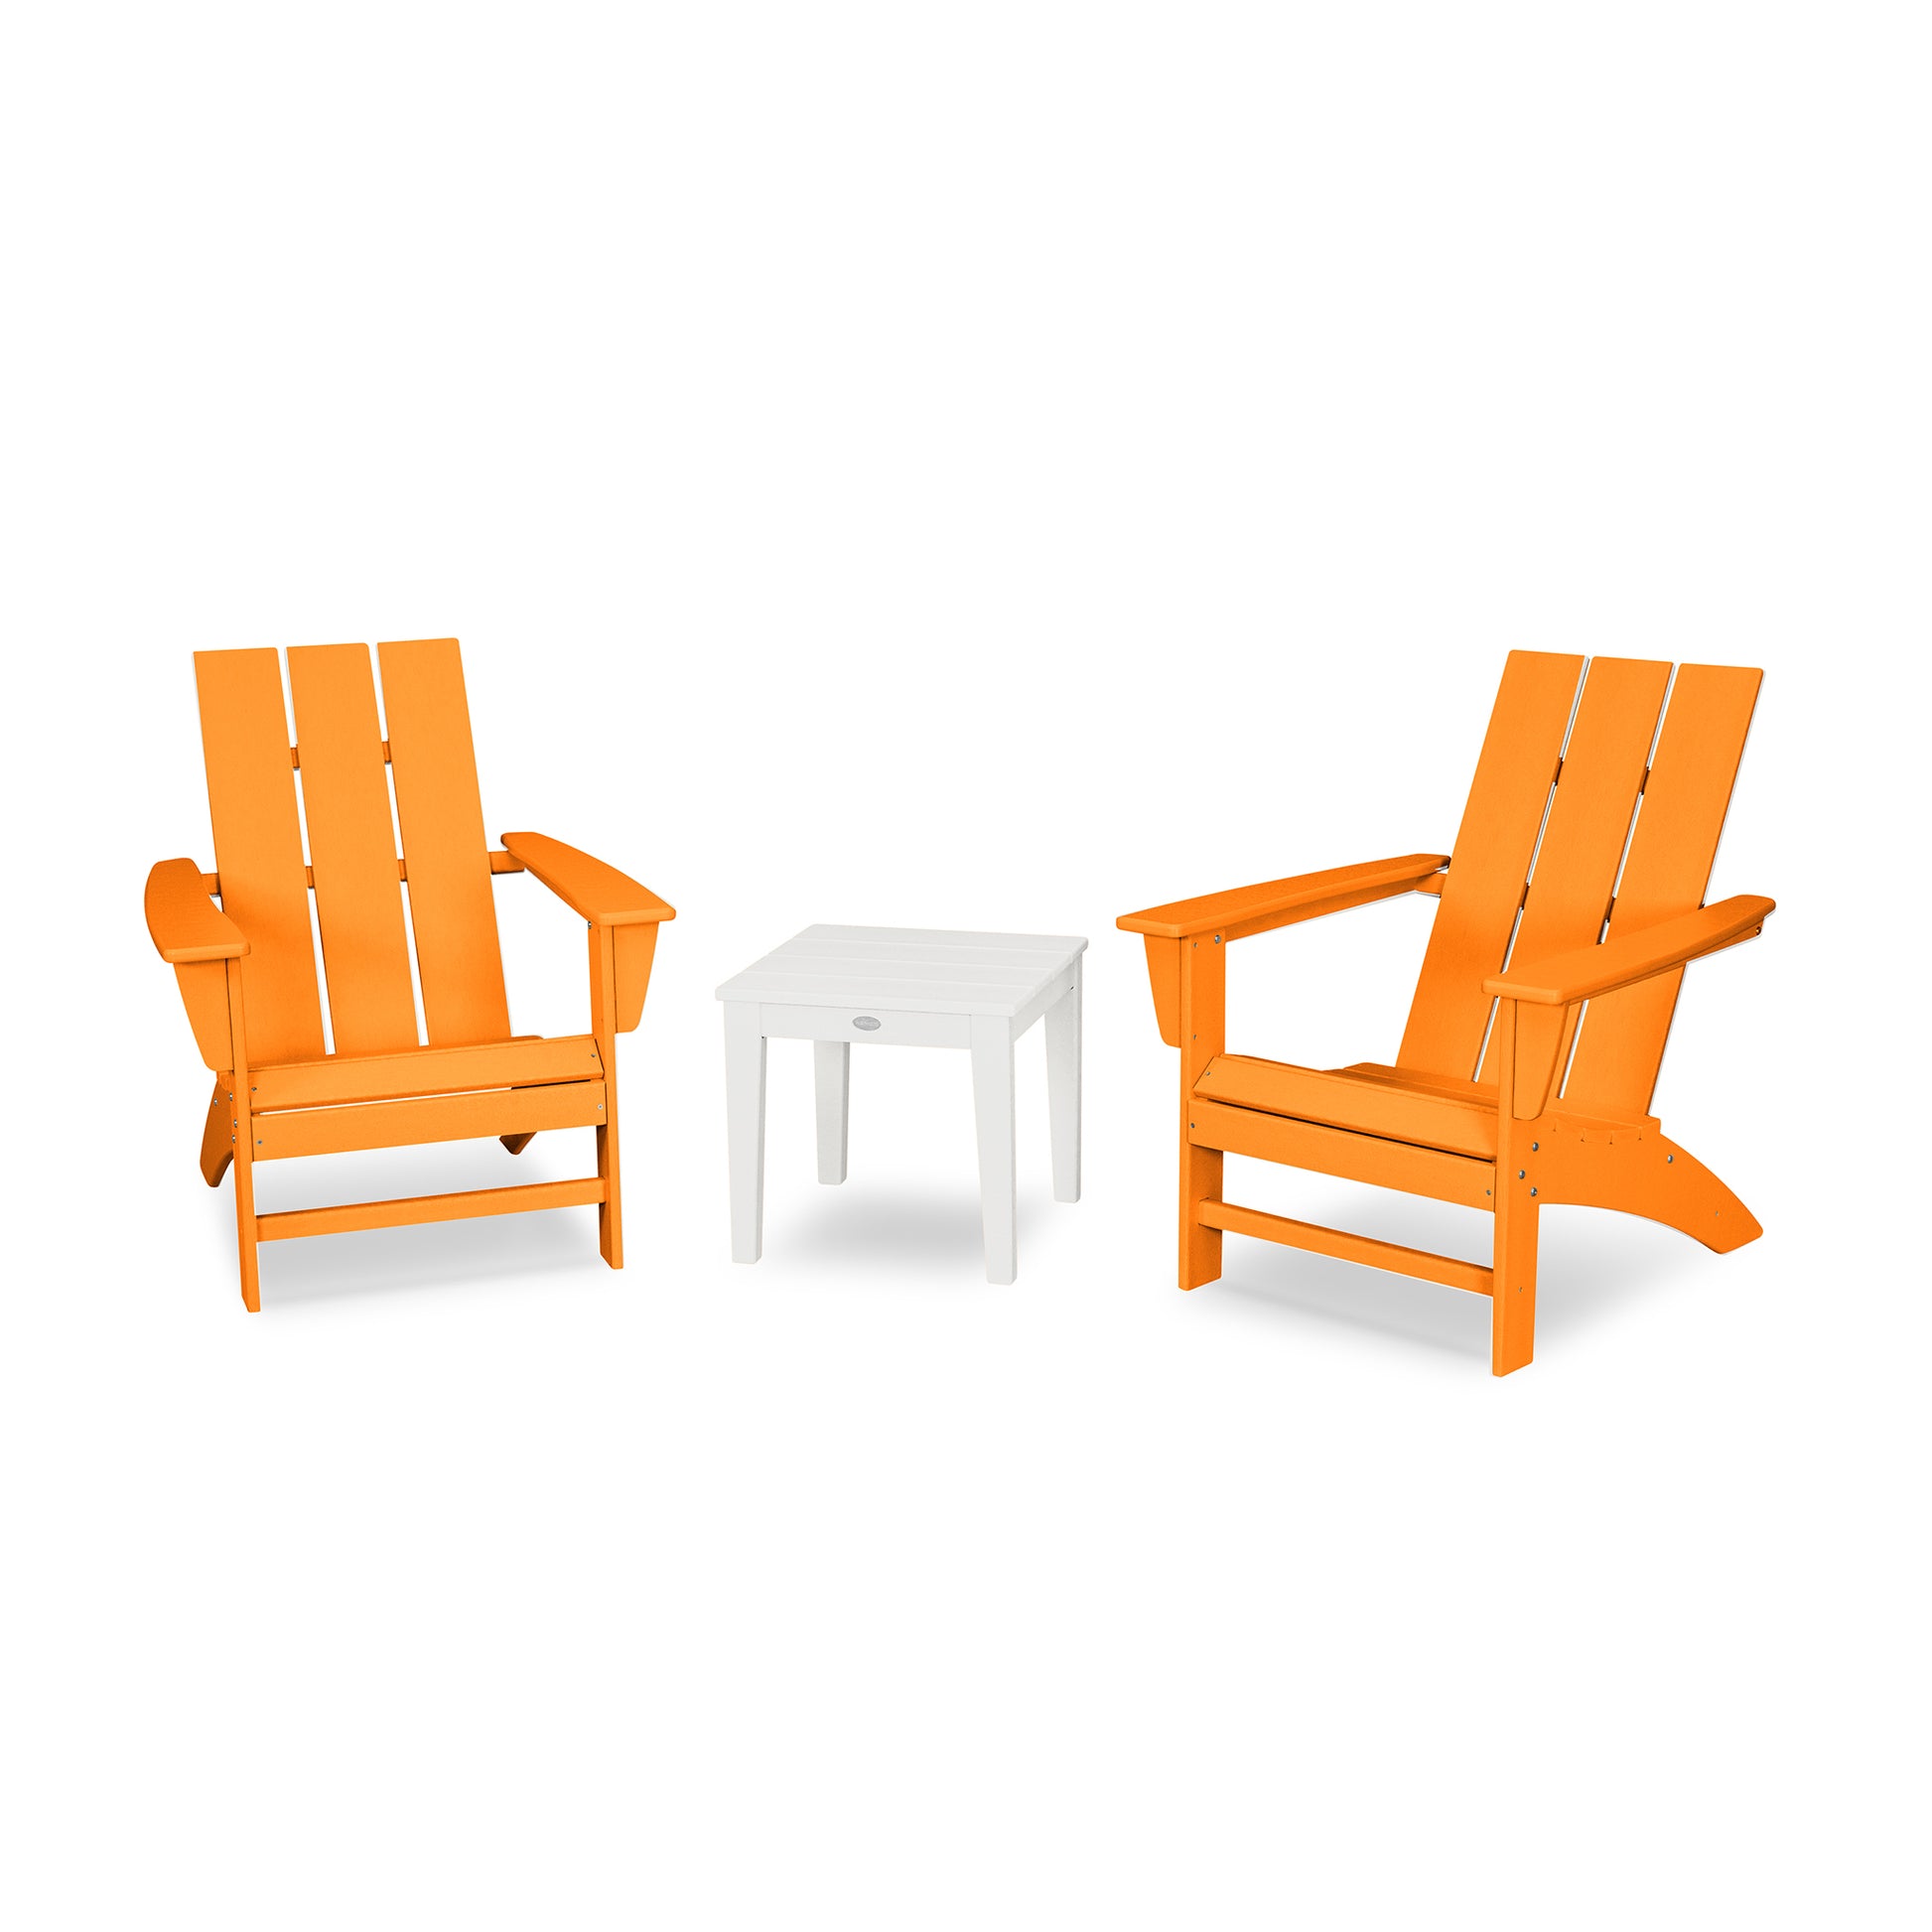 Two orange POLYWOOD Modern Adirondack chairs made from POLYWOOD lumber with a white side table set against a plain white background.